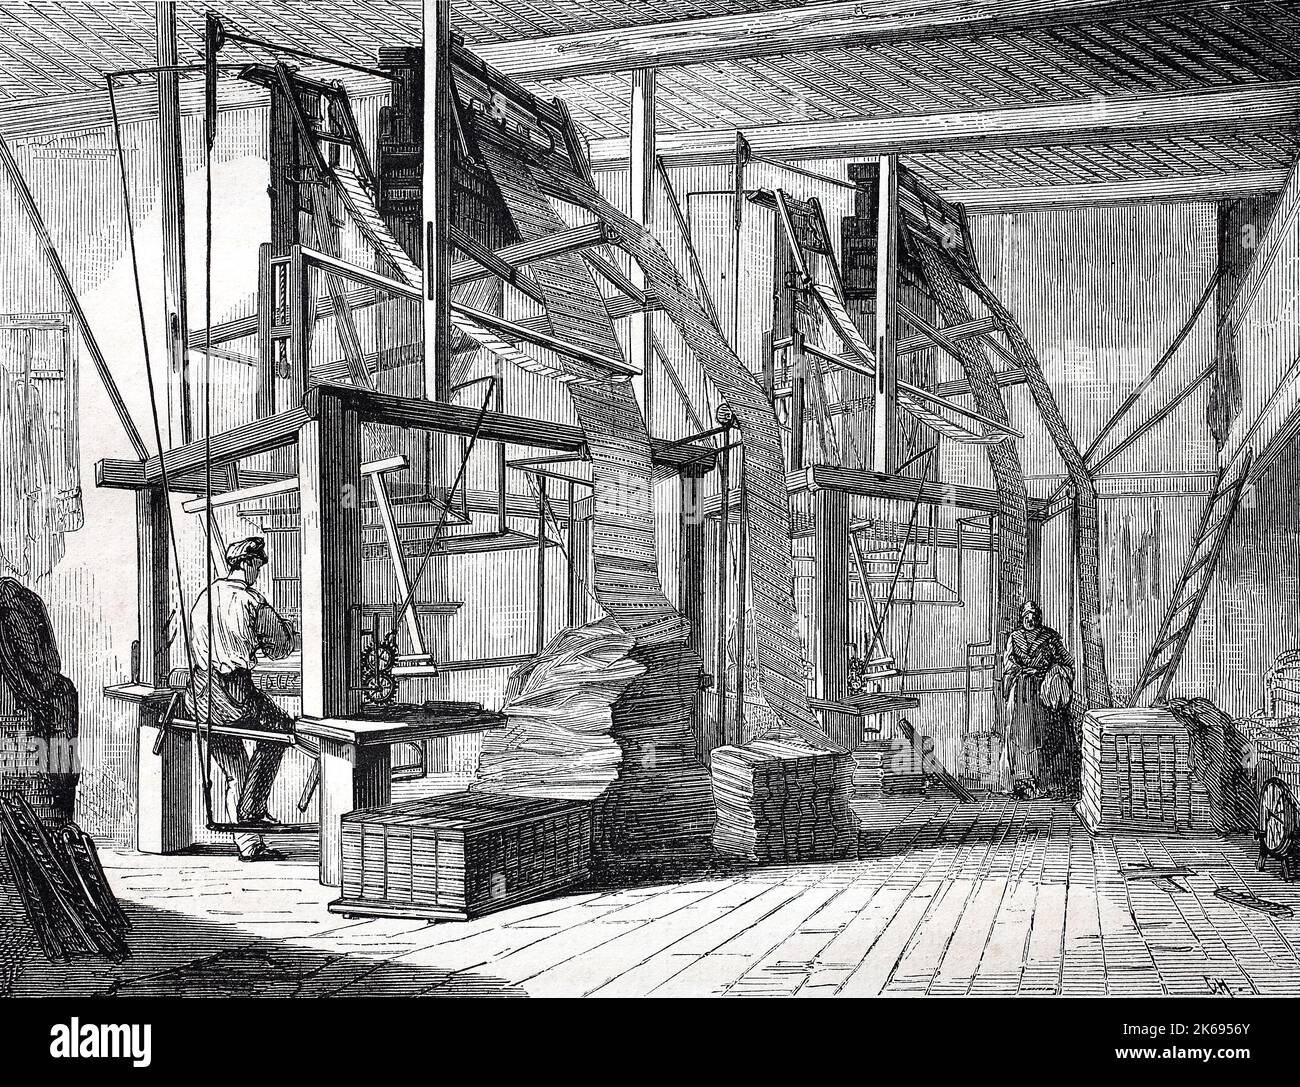 Digital improved reproduction, atelier for the production of silk fabric, original woodprint from th 19th century Stock Photo